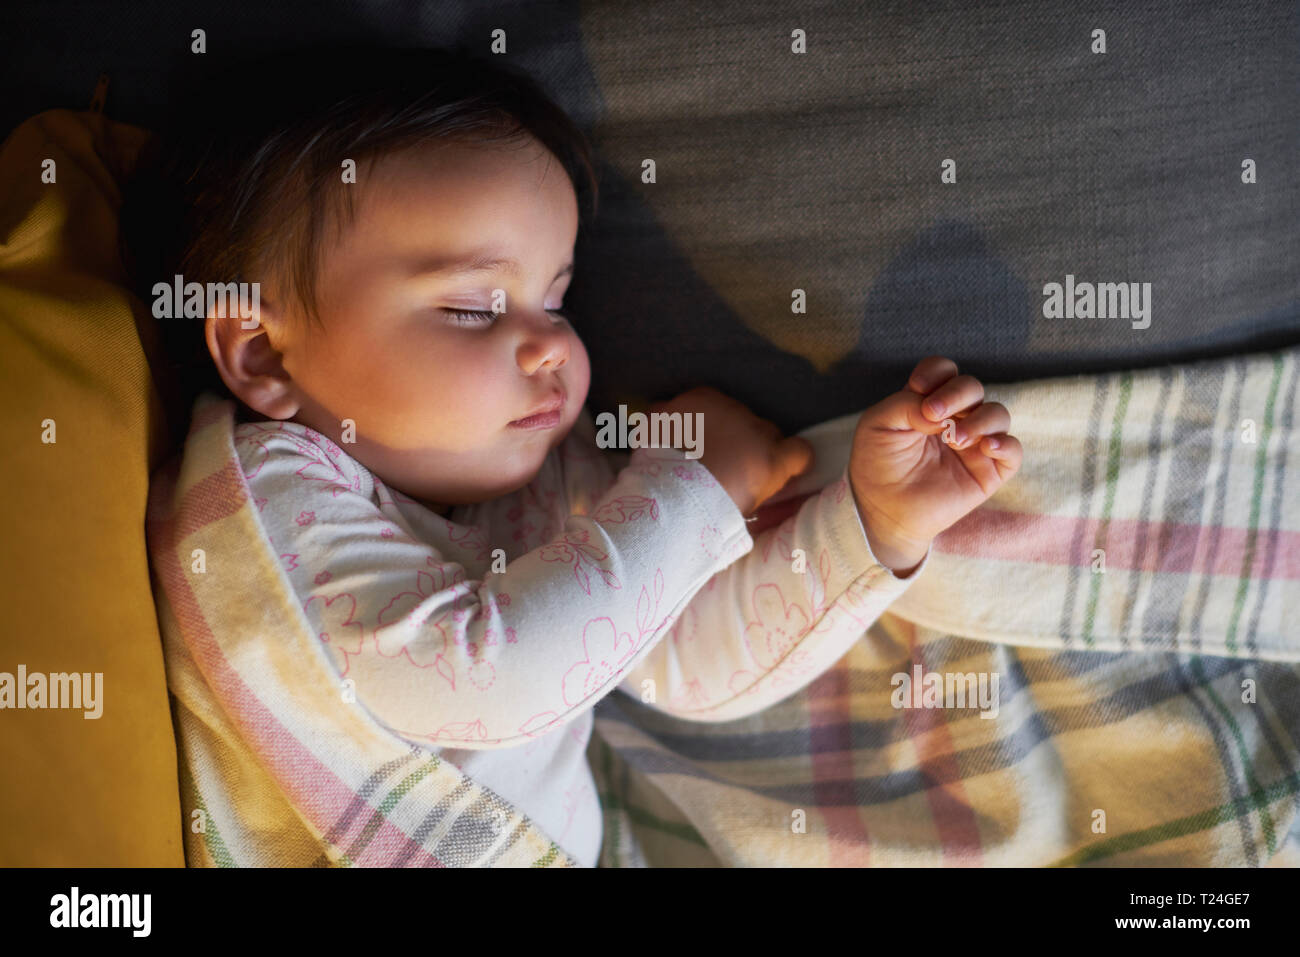 Cute baby girl sleeping Banque D'Images